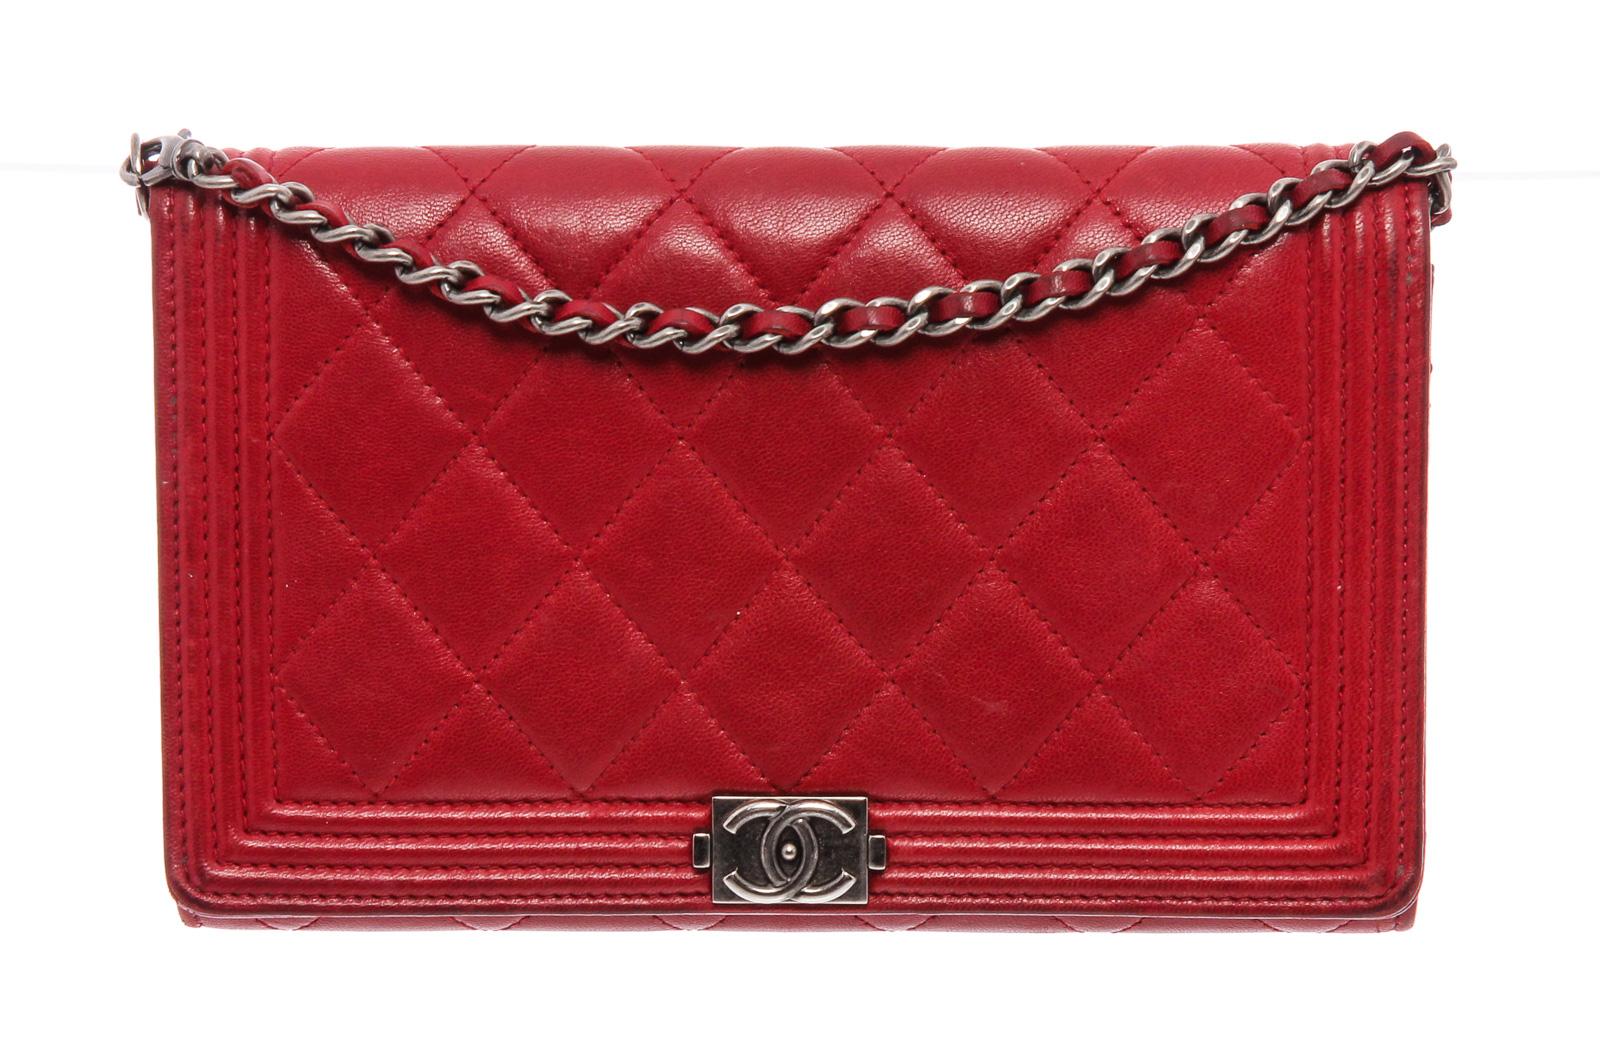 Chanel Red Lambskin Leather Boy WOC Wallet On Chain Bag 2